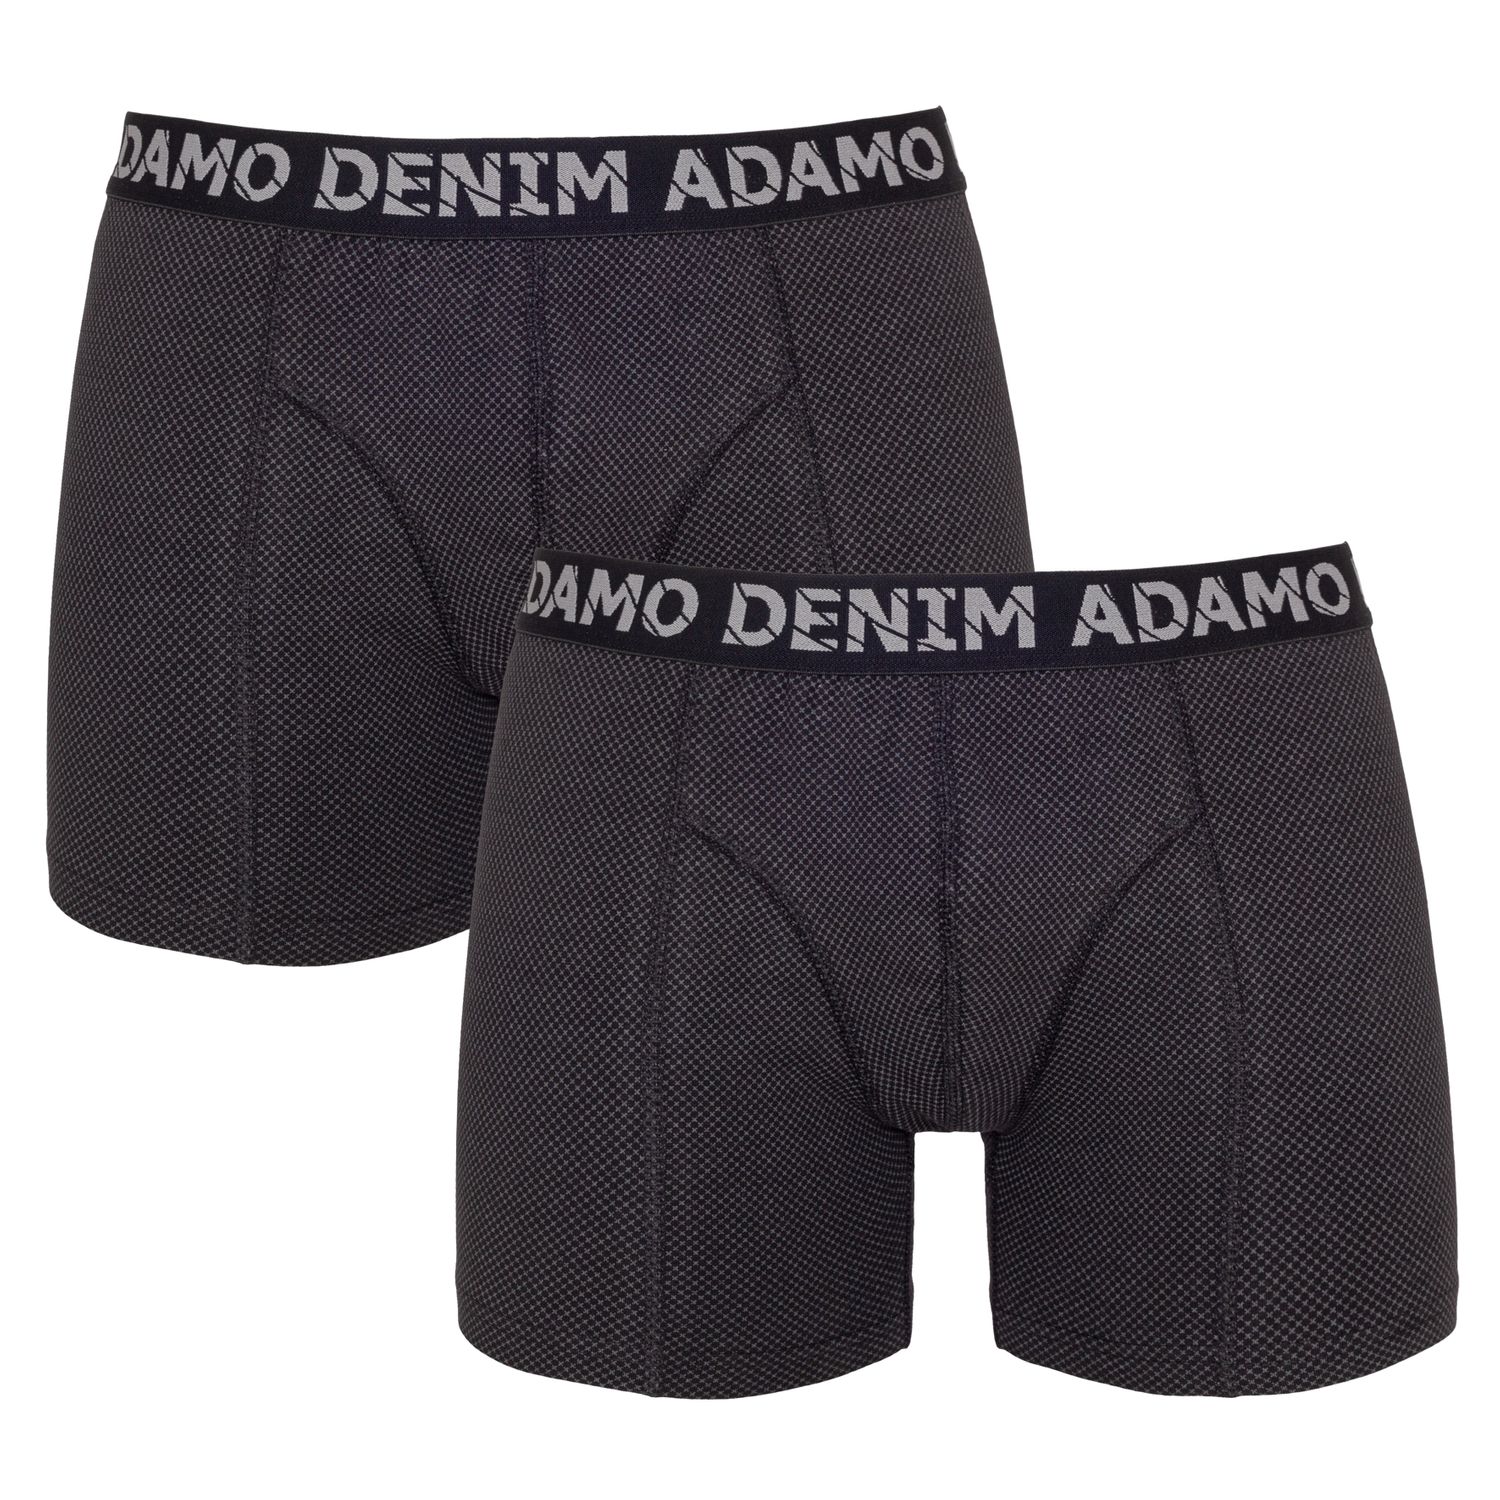 Black maxipant by ADAMO series "Julian" in oversizes up to 20 // double pack